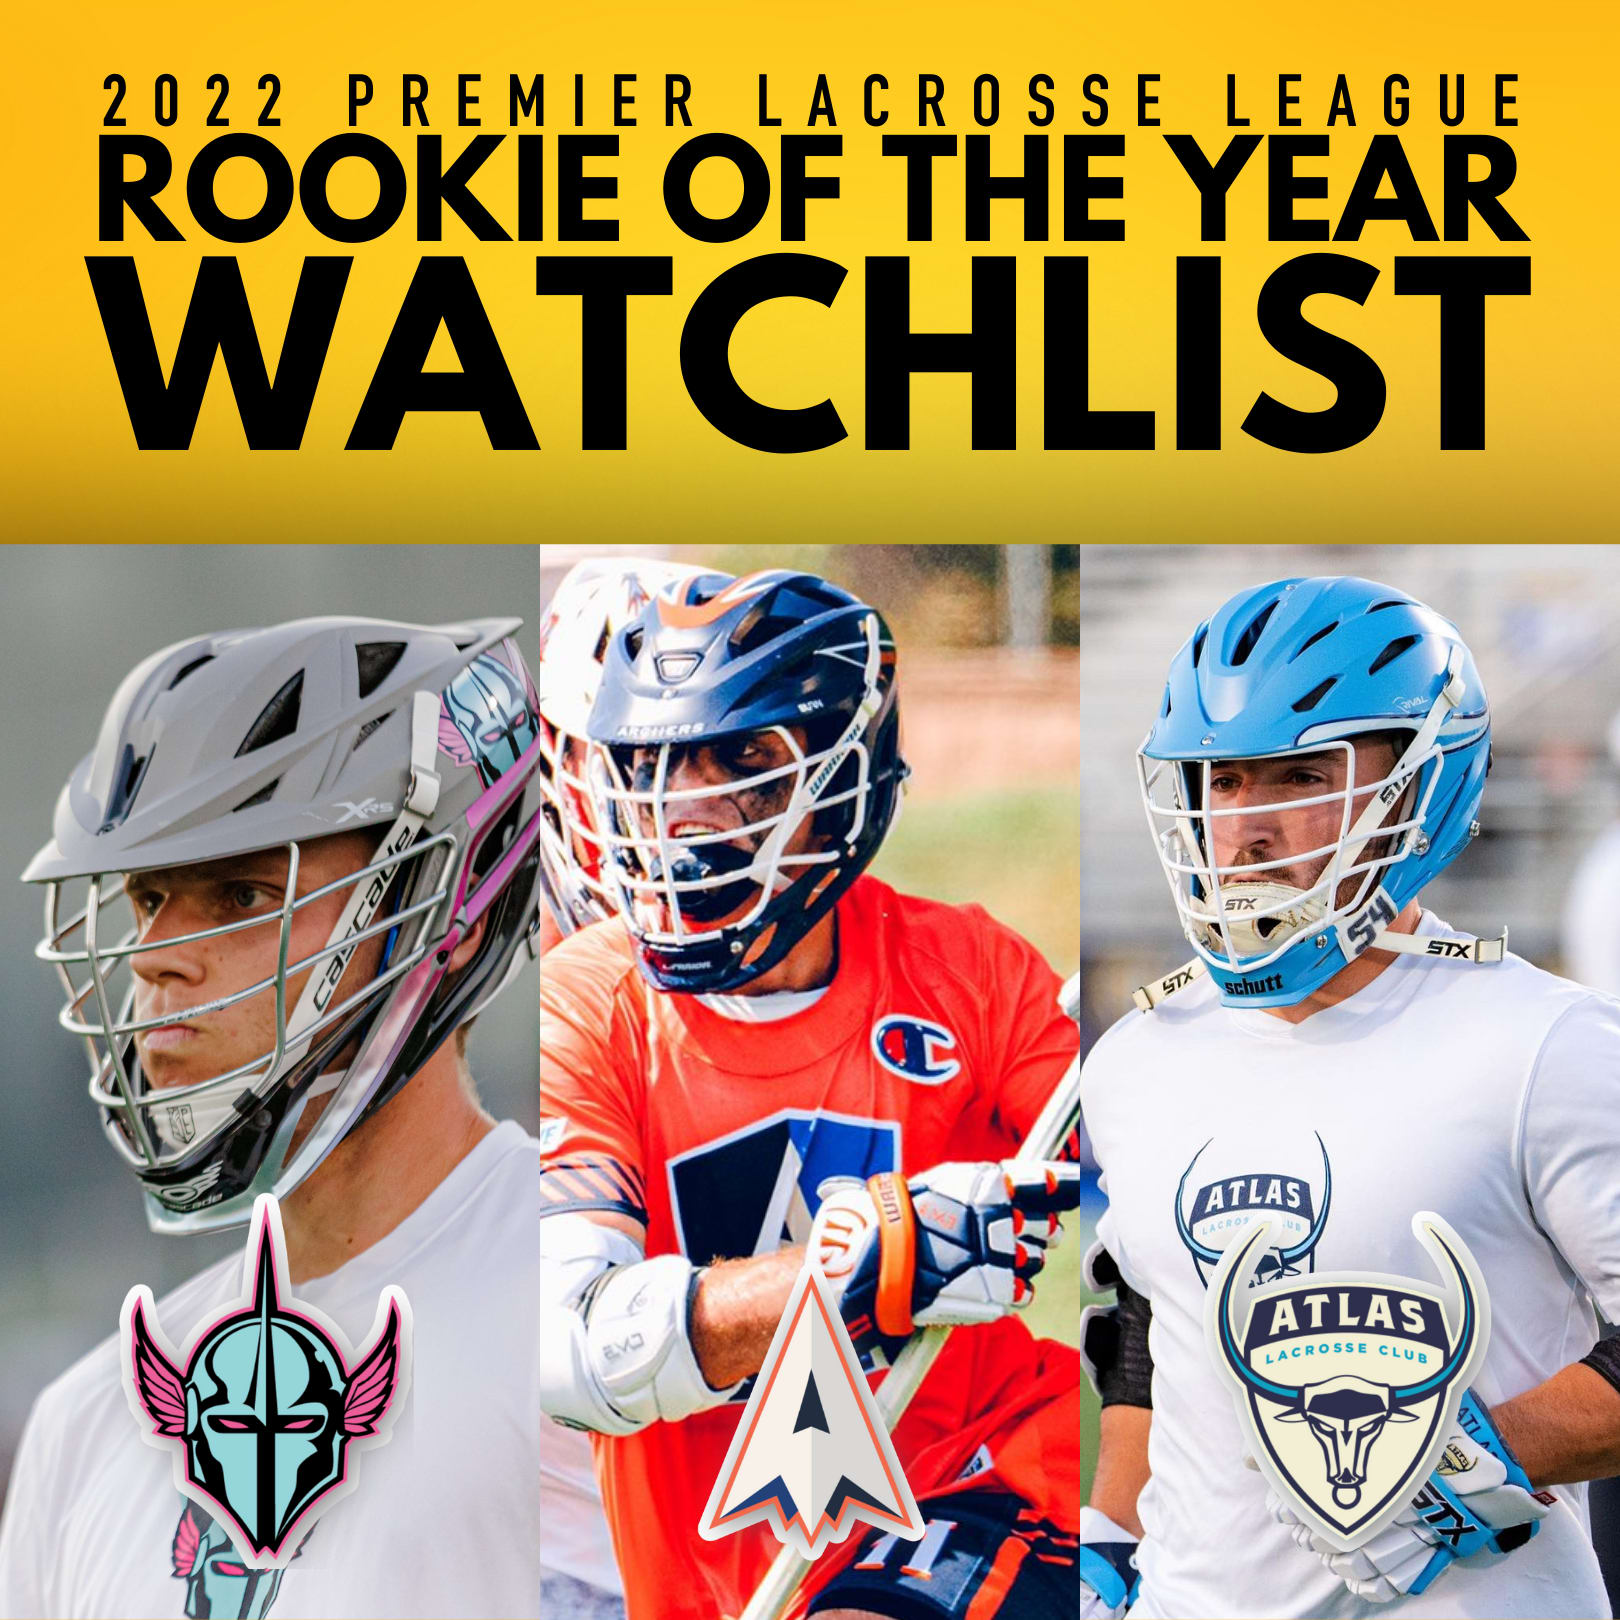 Nichtern Named Premier Lacrosse League Rookie Of The Year - Army West Point